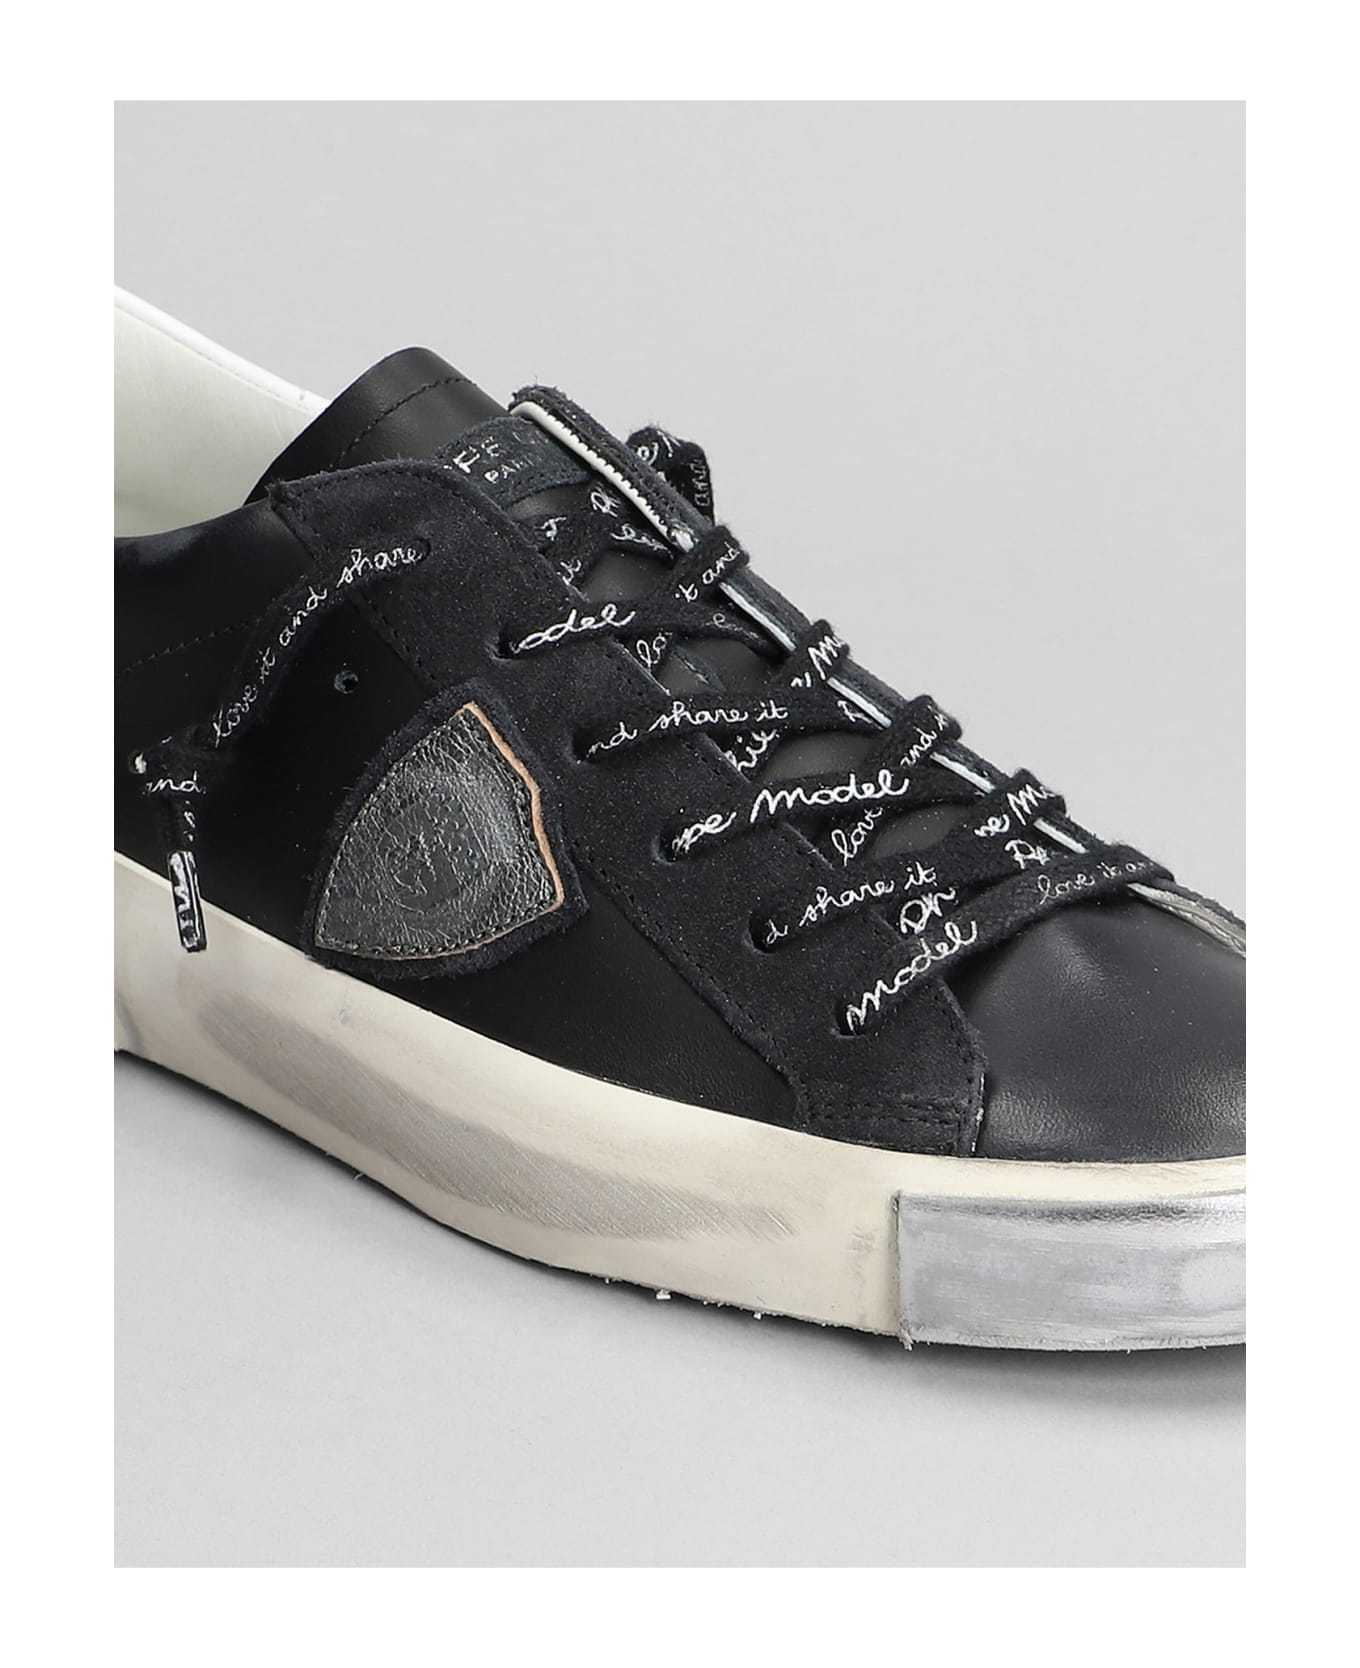 Philippe Model Prsx Low Sneakers In Black Suede And Leather - black スニーカー